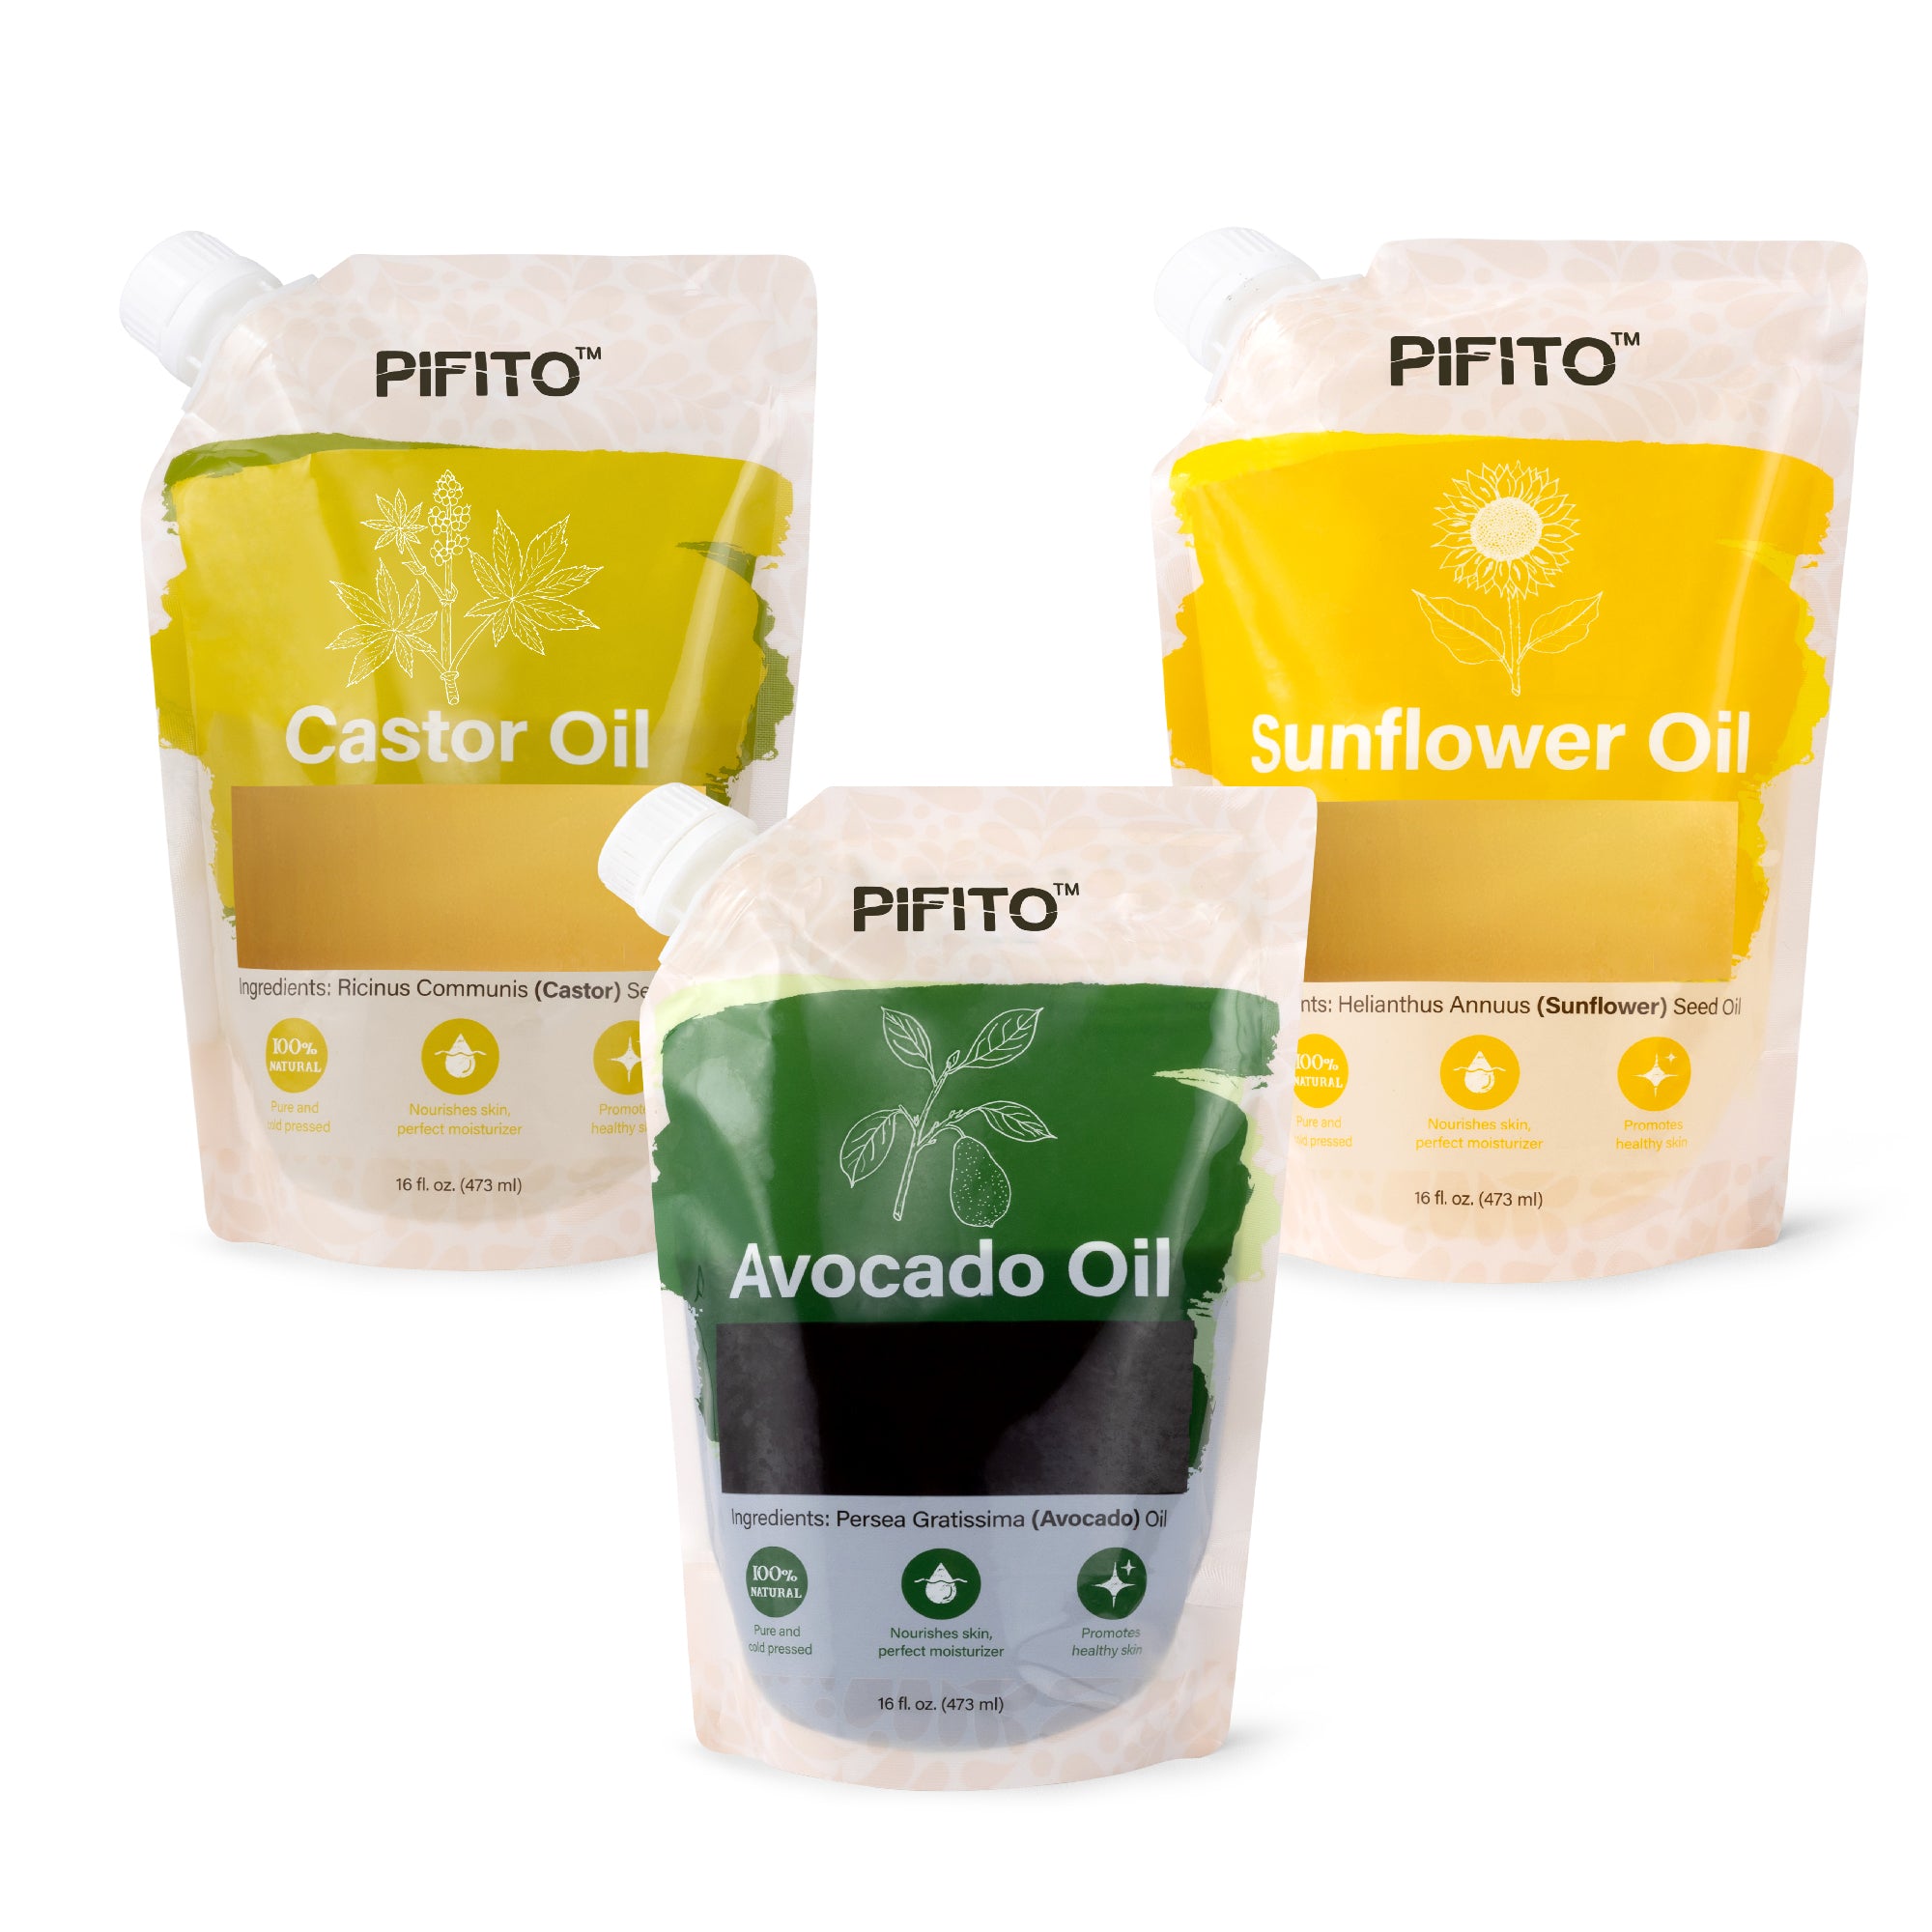  Pifito Olive Oil (32 oz) for Soap Making │ Premium 100% Pure  and Natural Carrier Oil for Essential Oils, Skin Care, Hair and Body Oil,  Moisturizing Massage Oil for Aromatherapy 